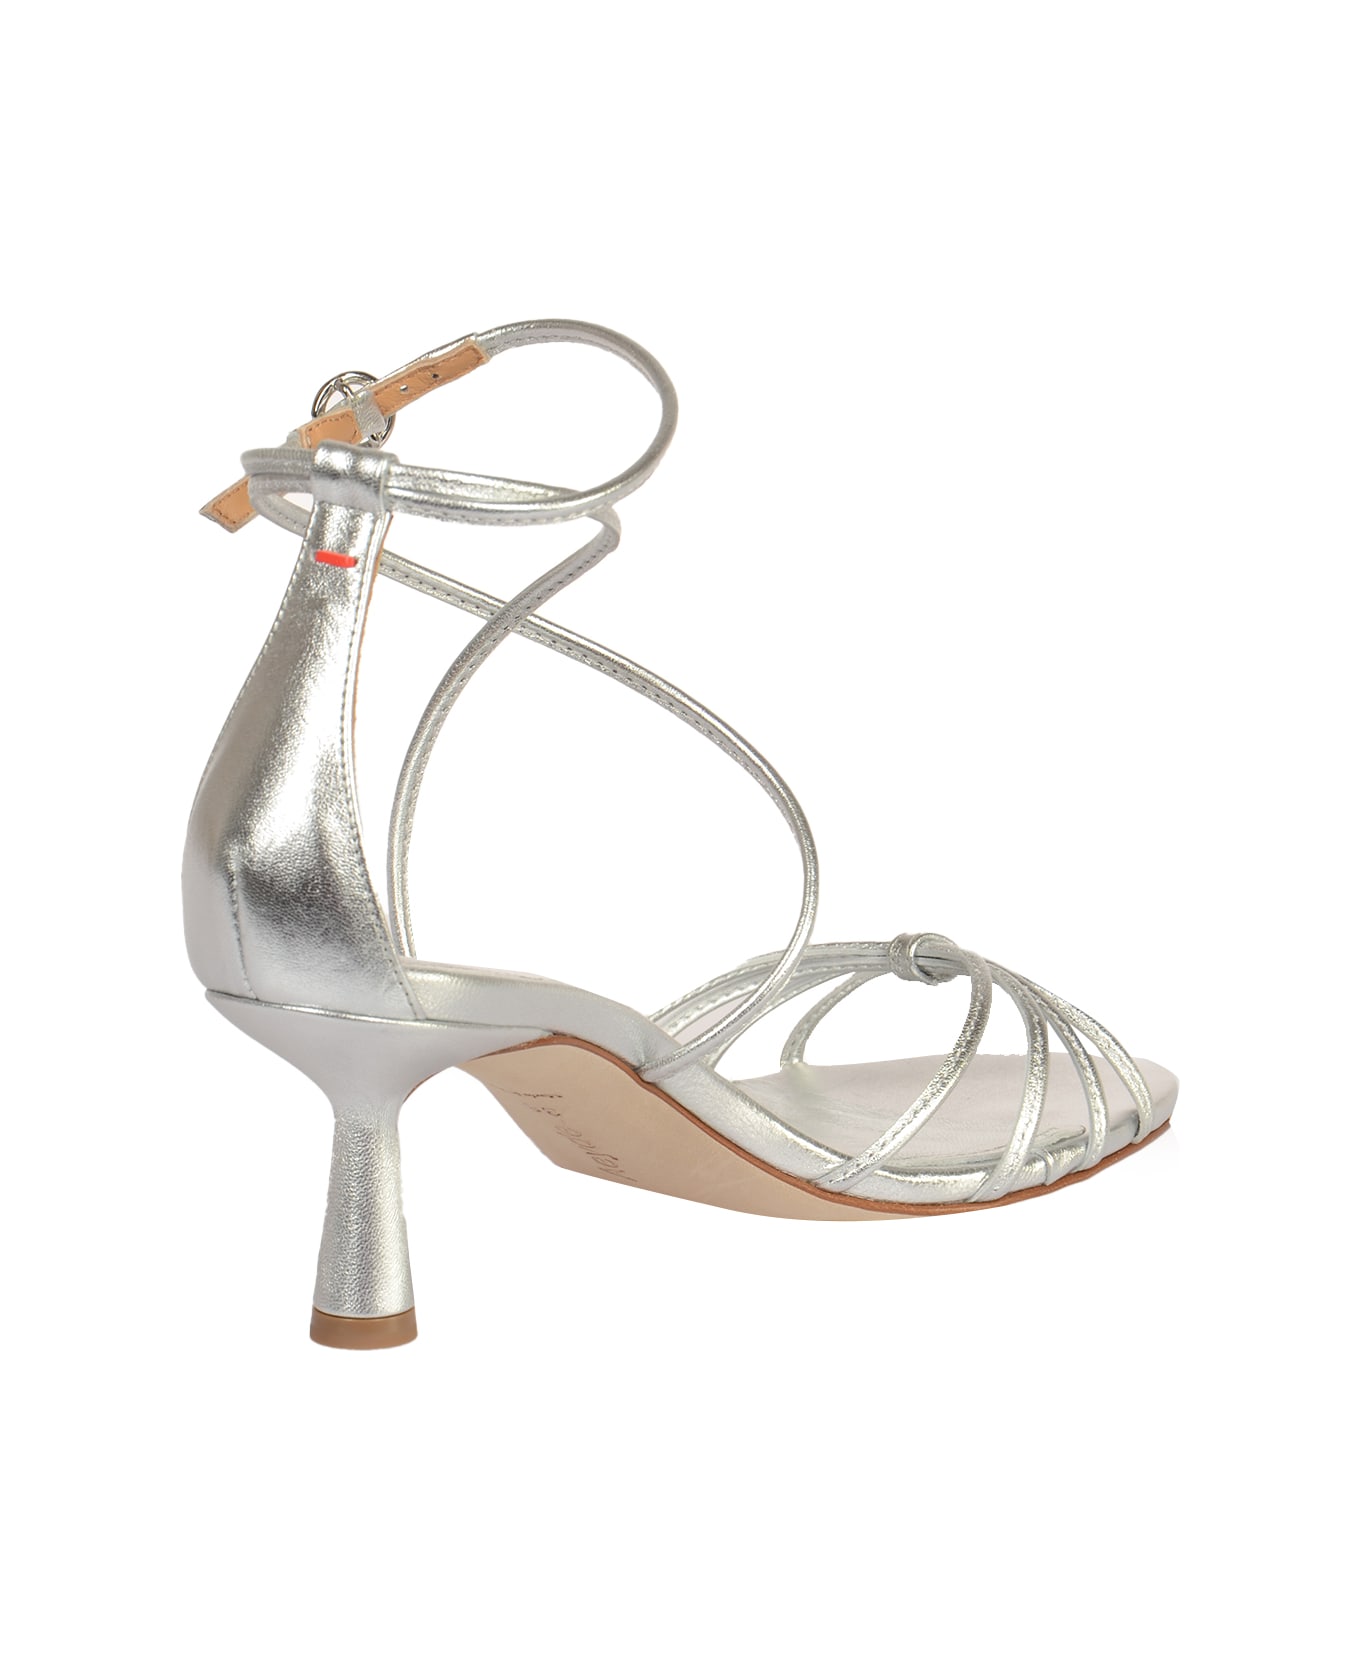 aeyde Luella Laminated Sandals - Silver